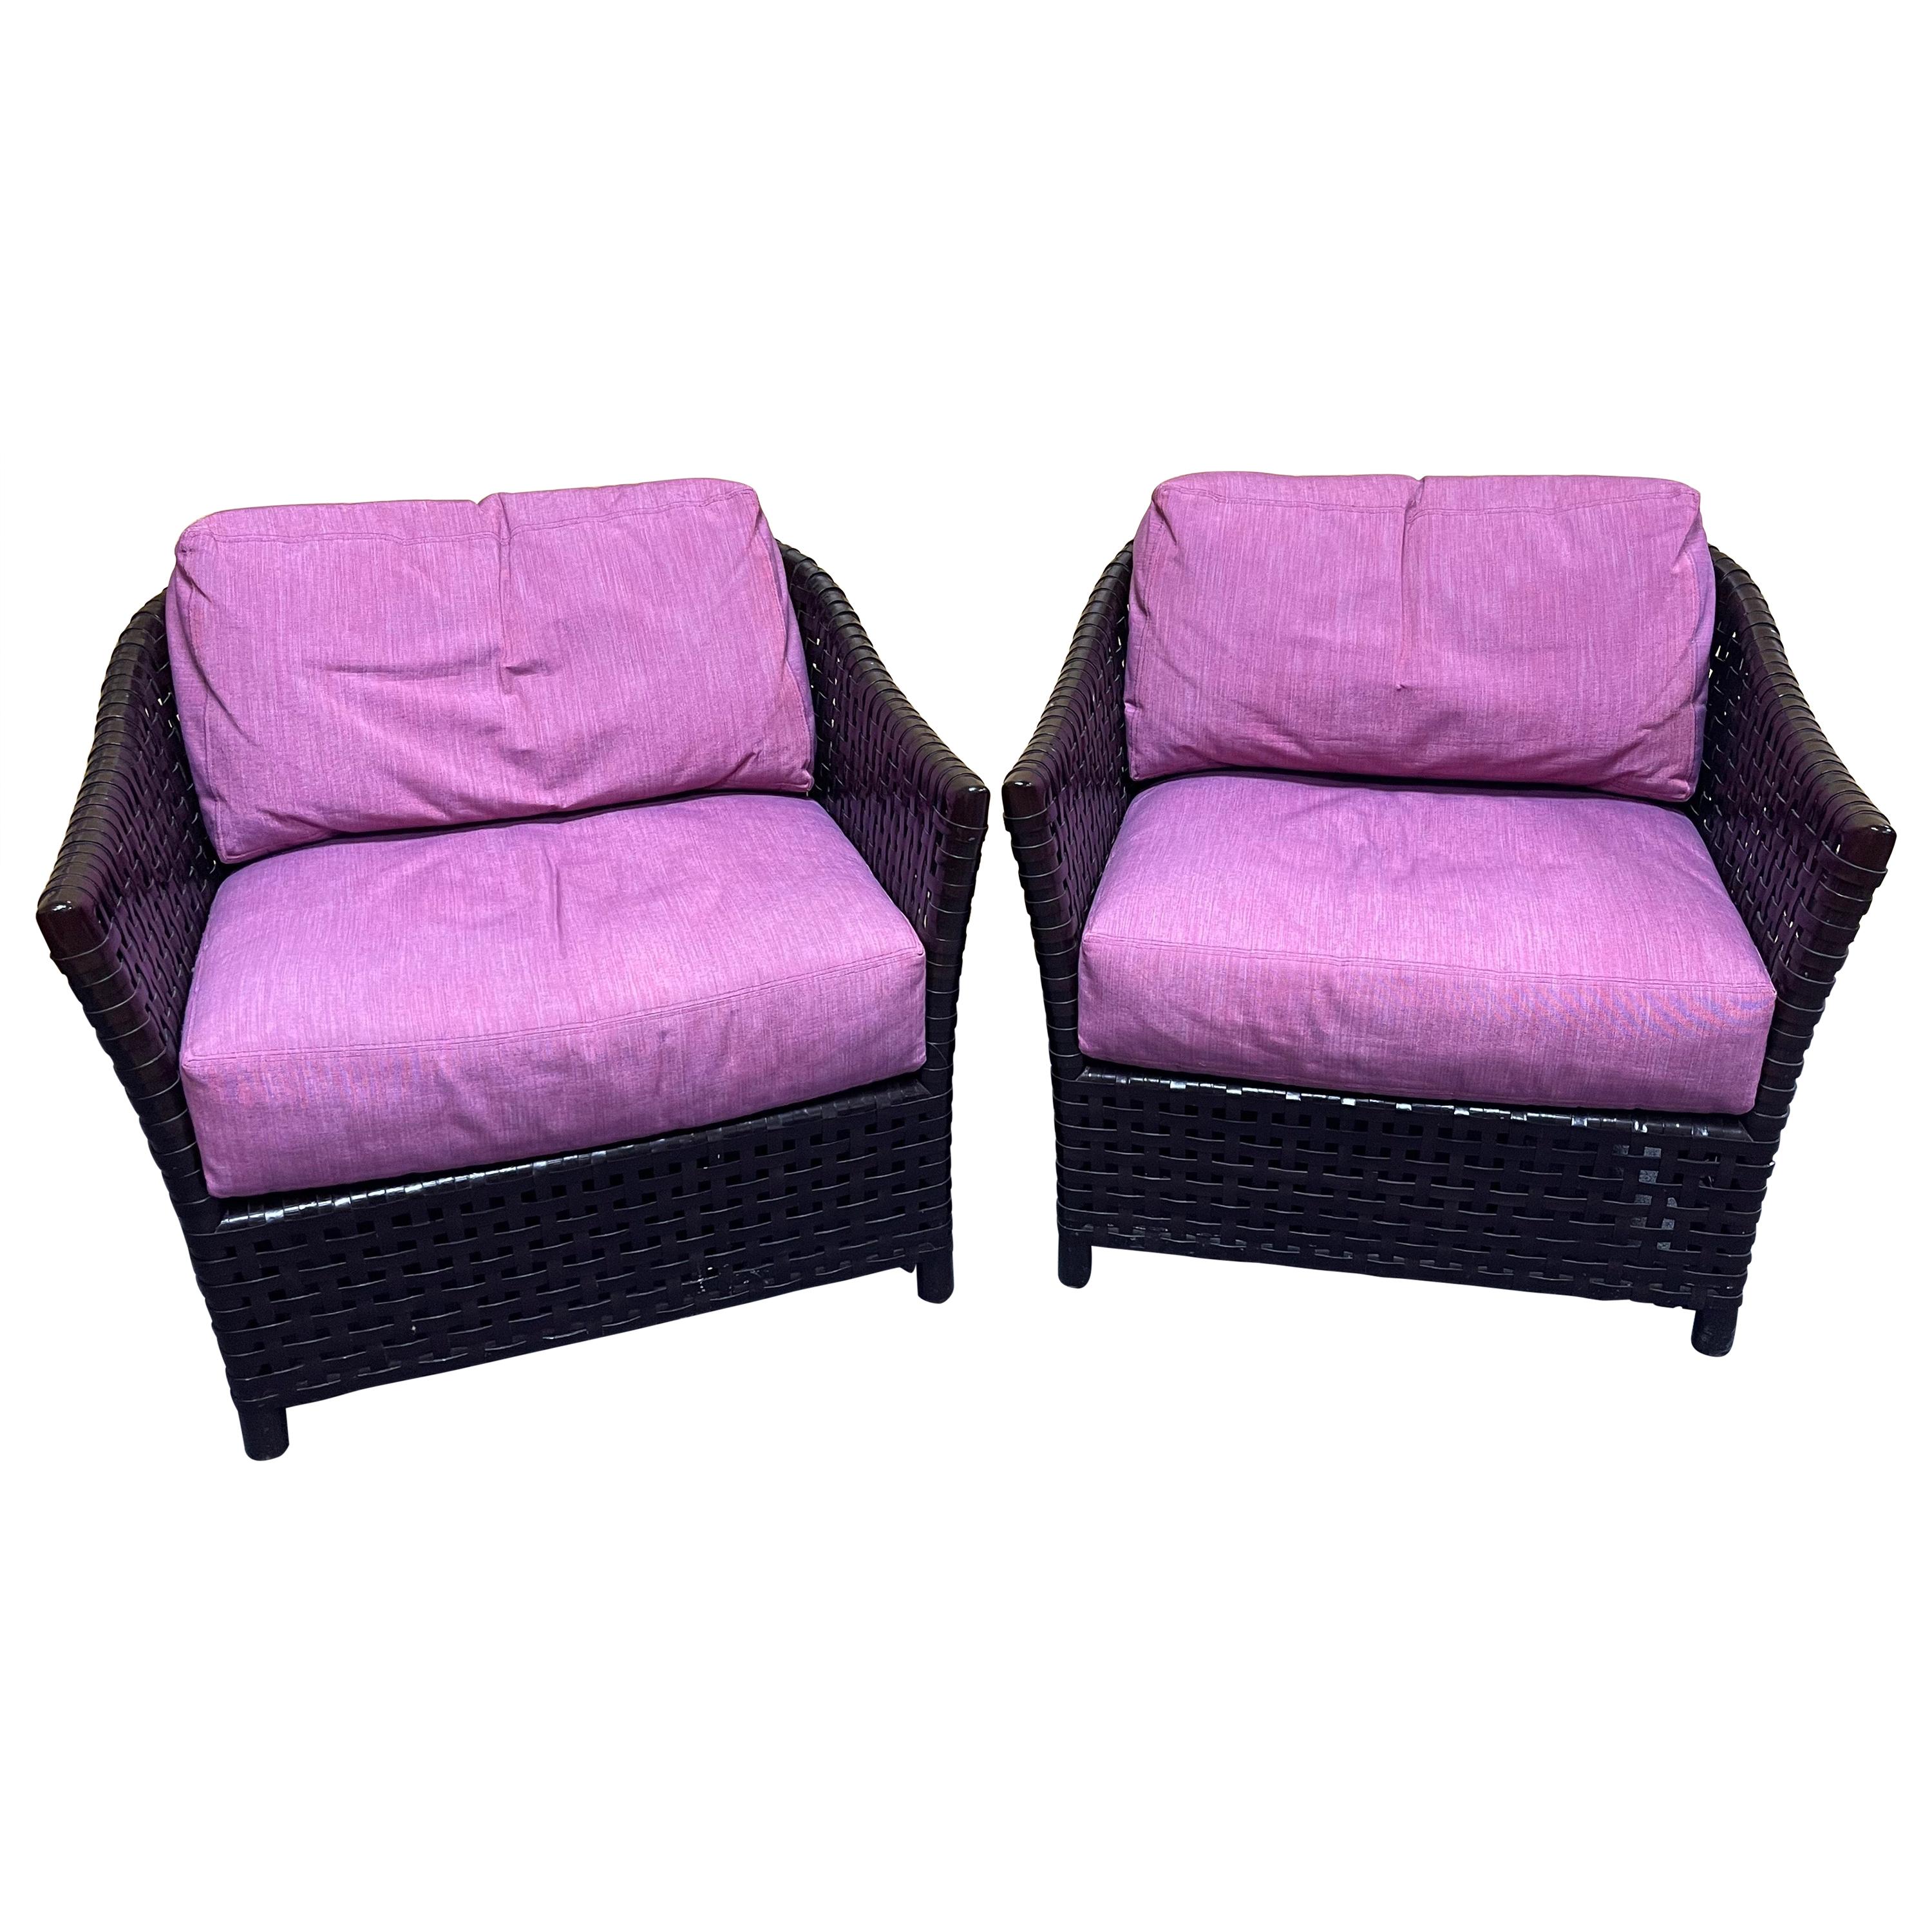 Pair of Laced Rawhide Lounge Chairs form the Antalya Collection by McGuire For Sale